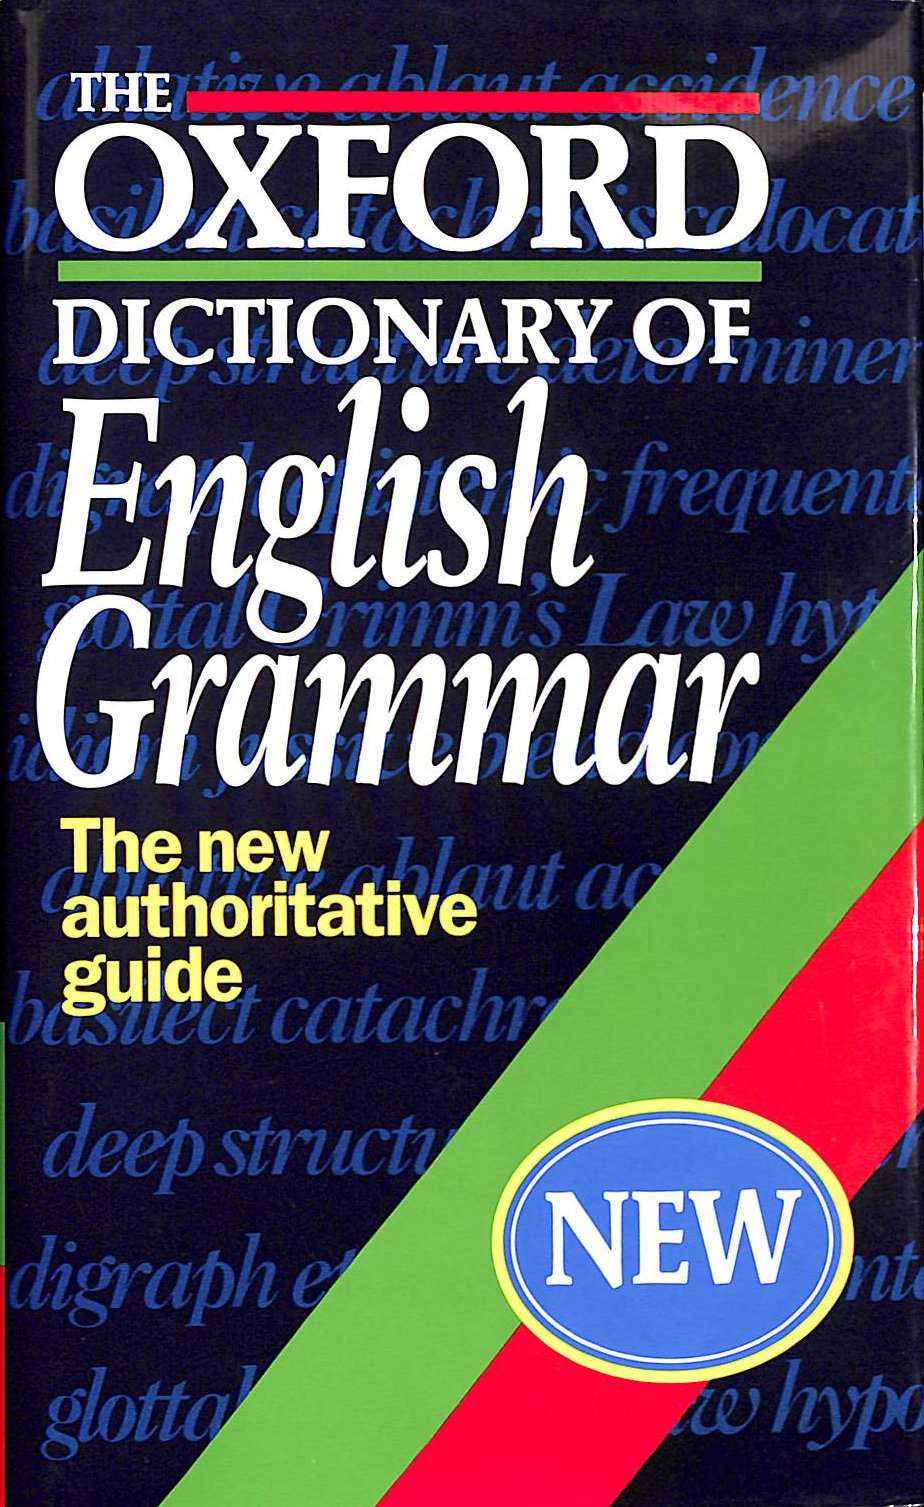 CHALKER, SYLVIA AND WEINER, EDMUND - The Oxford Dictionary of English Grammar